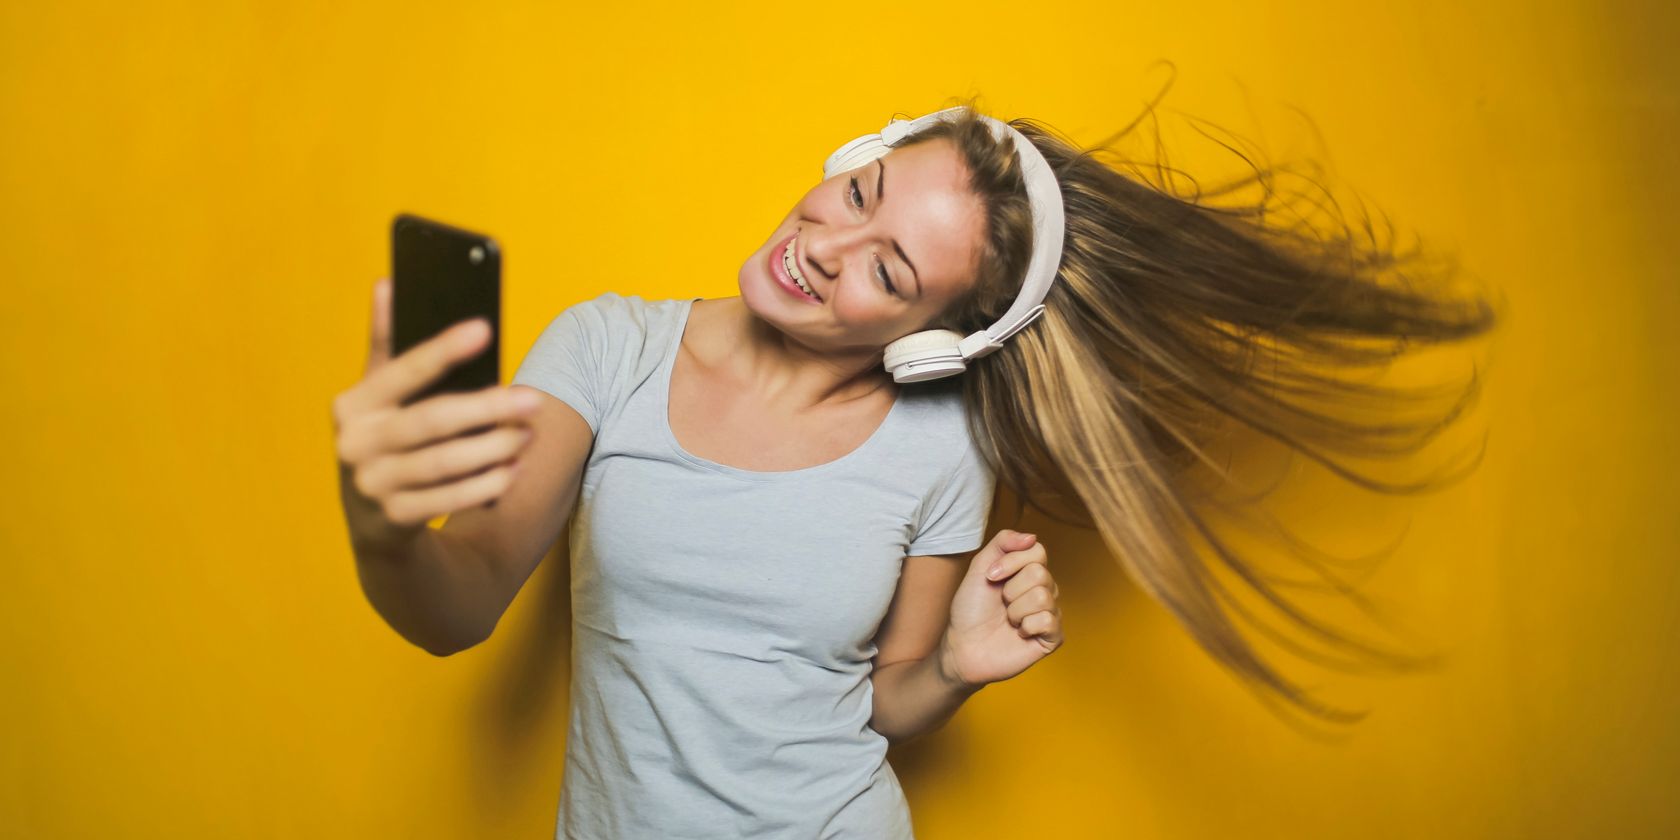 woman in headphones dancing while holding a phone